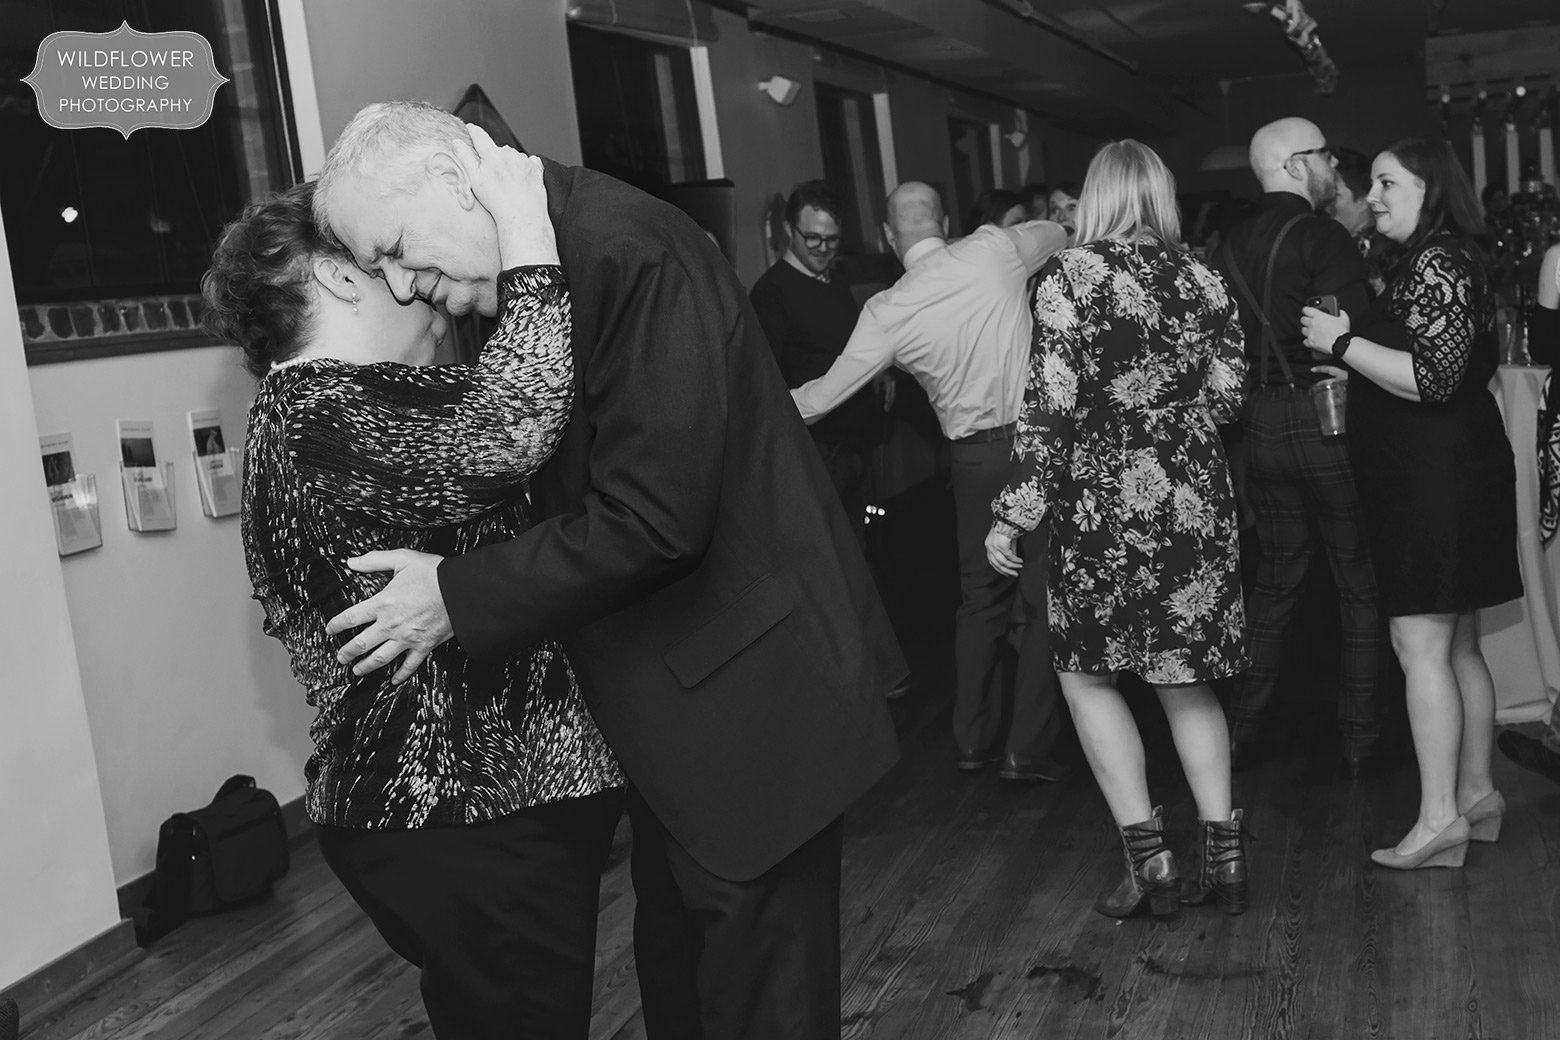 Parents have emotional dance at Sager Braudis wedding venue in downtown Columbia, MO.